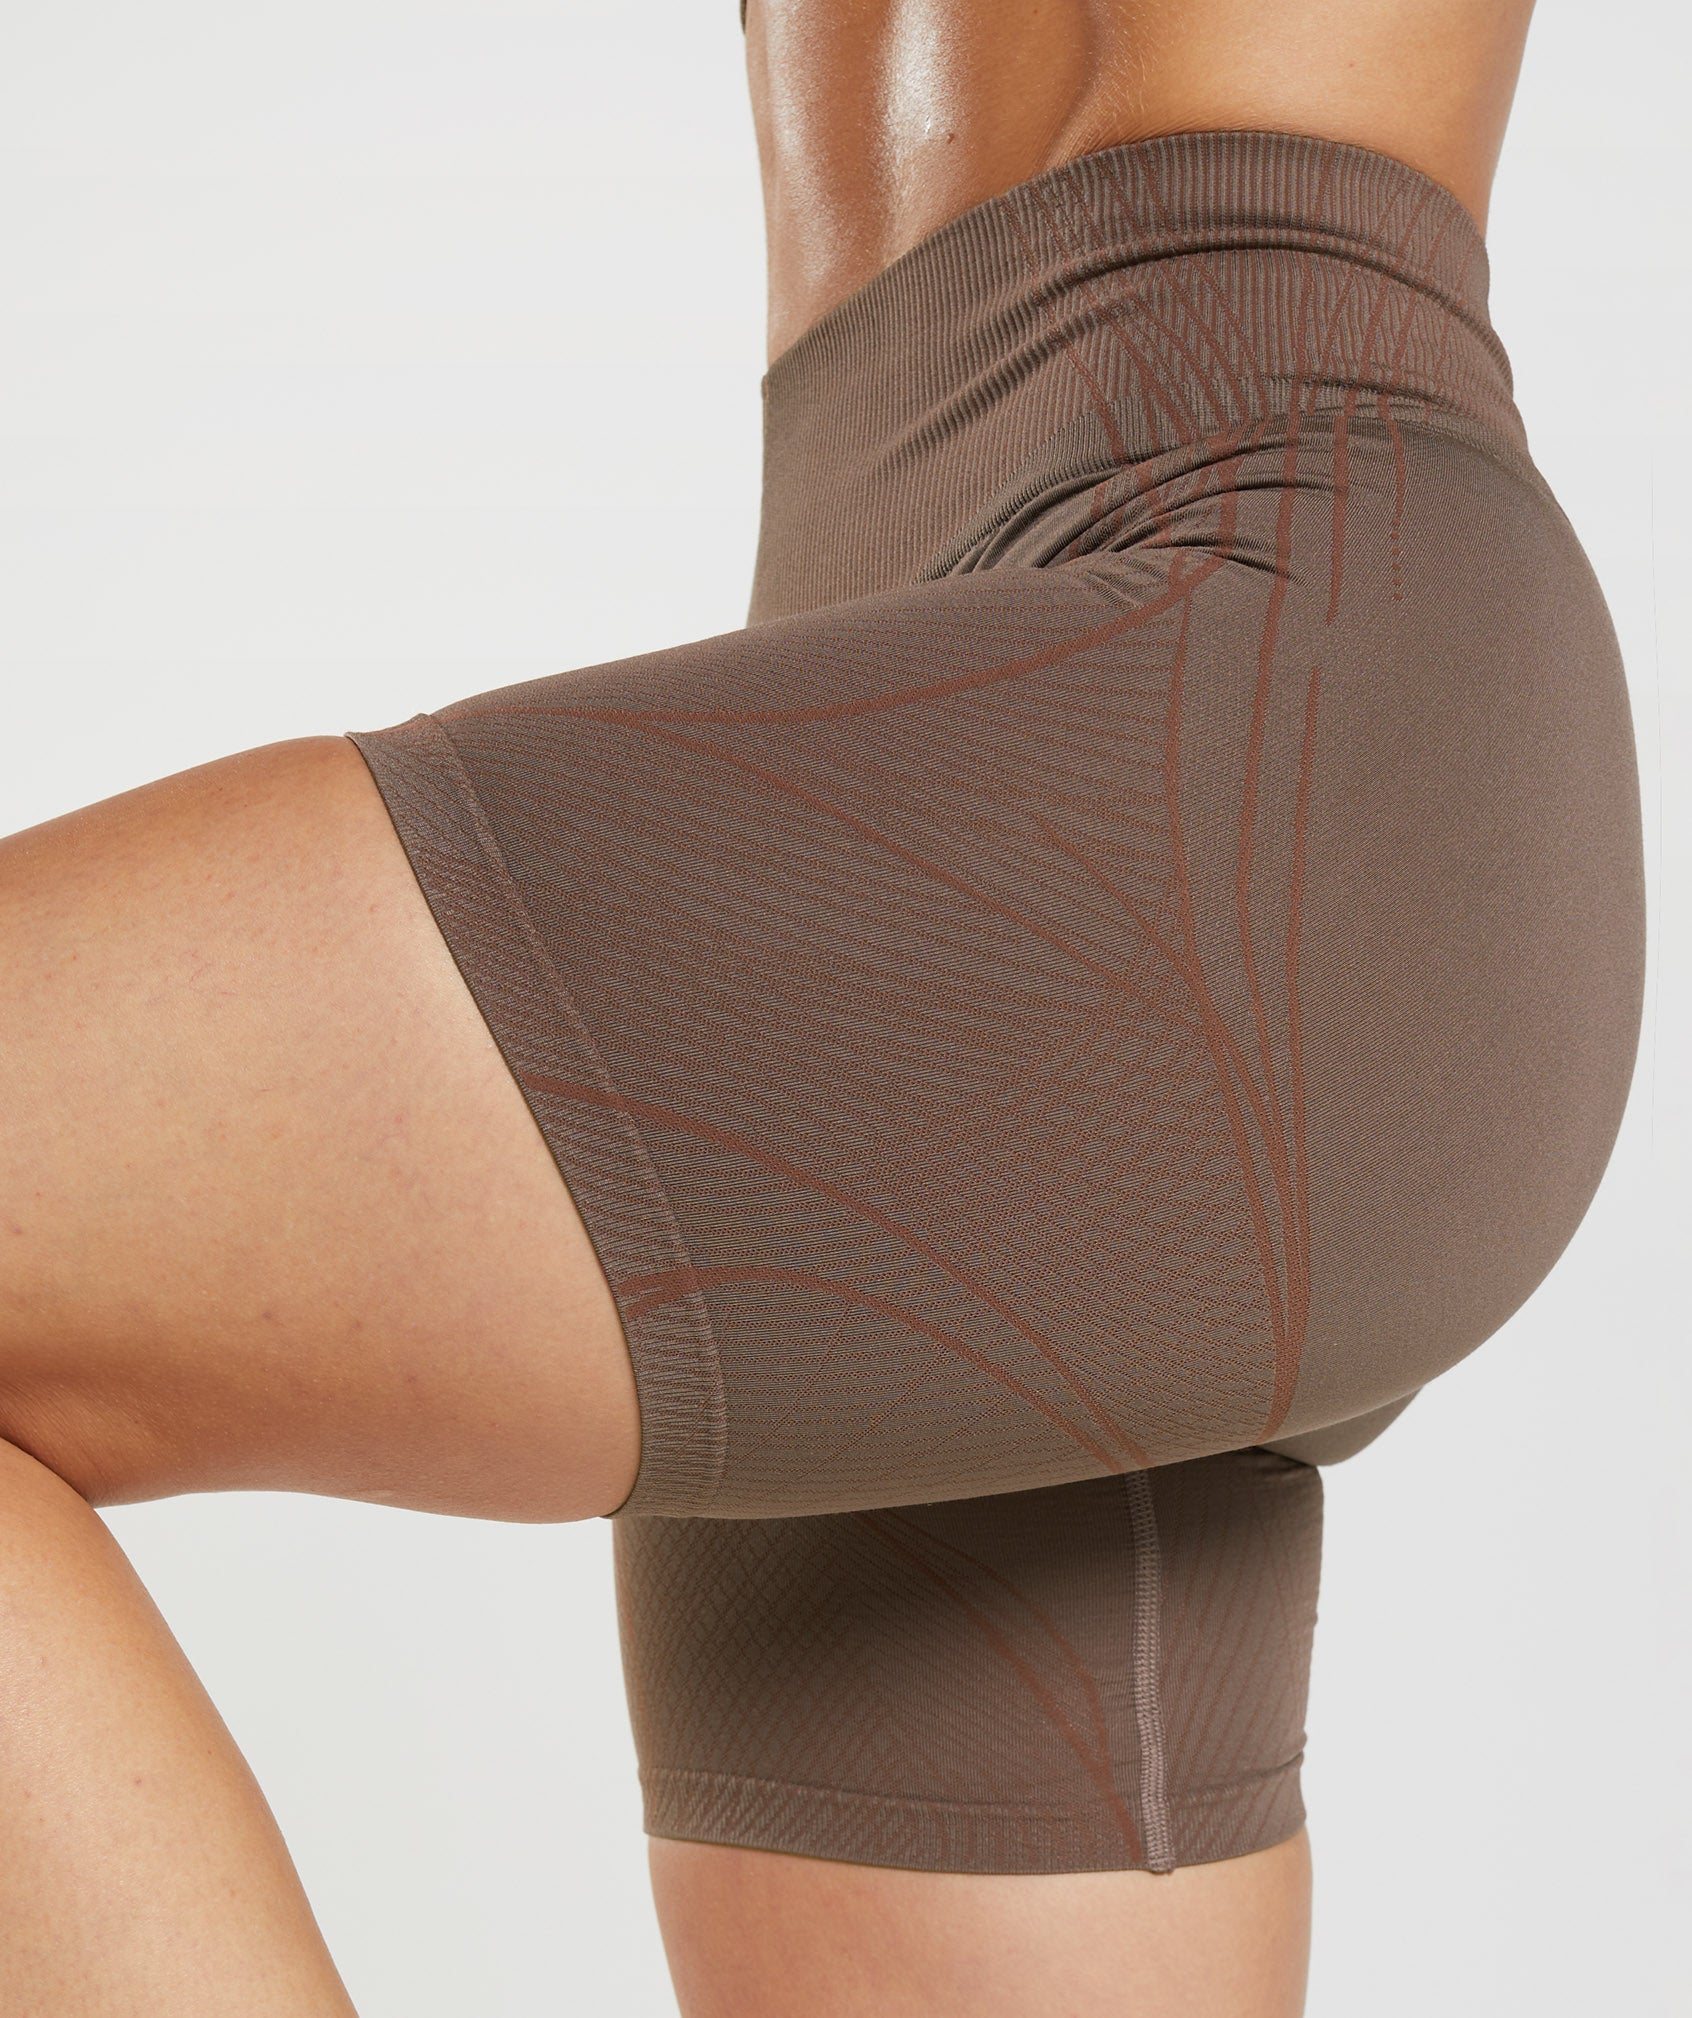 Apex Seamless Shorts in Truffle Brown/Cherry Brown - view 3